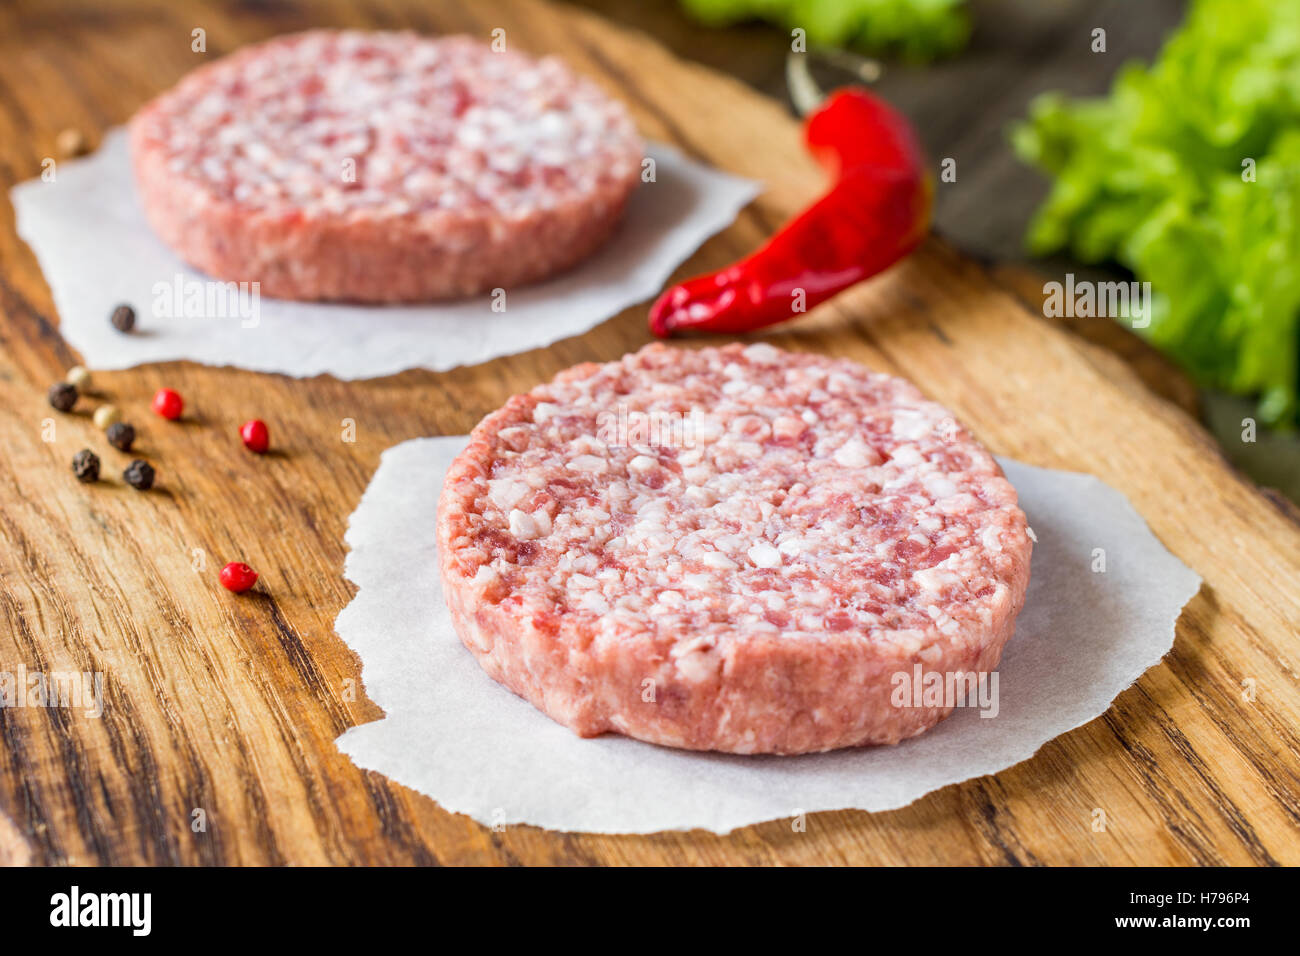 Raw fresh burger meat patties on wooden chopping board Stock Photo